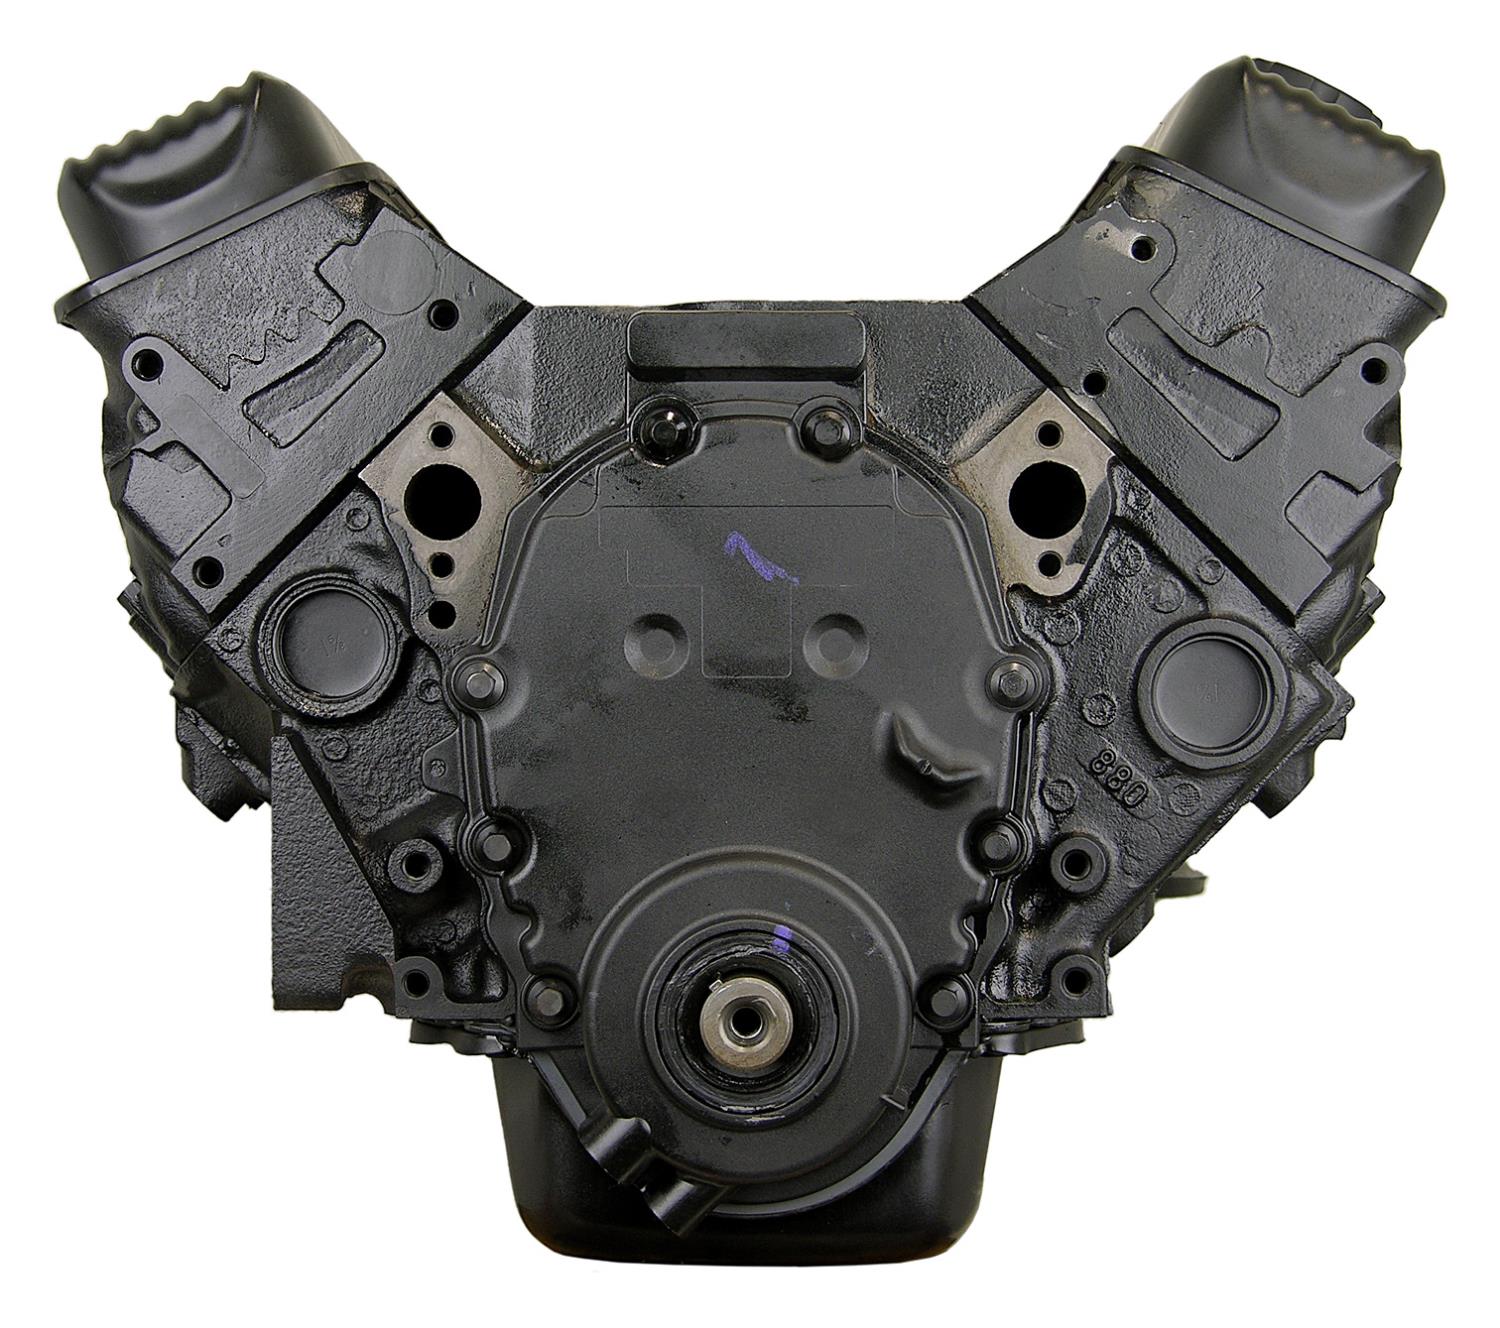 Remanufactured Crate Engine for Marine Applications with 1996-2005 Small Block Chevy 350ci/5.7L